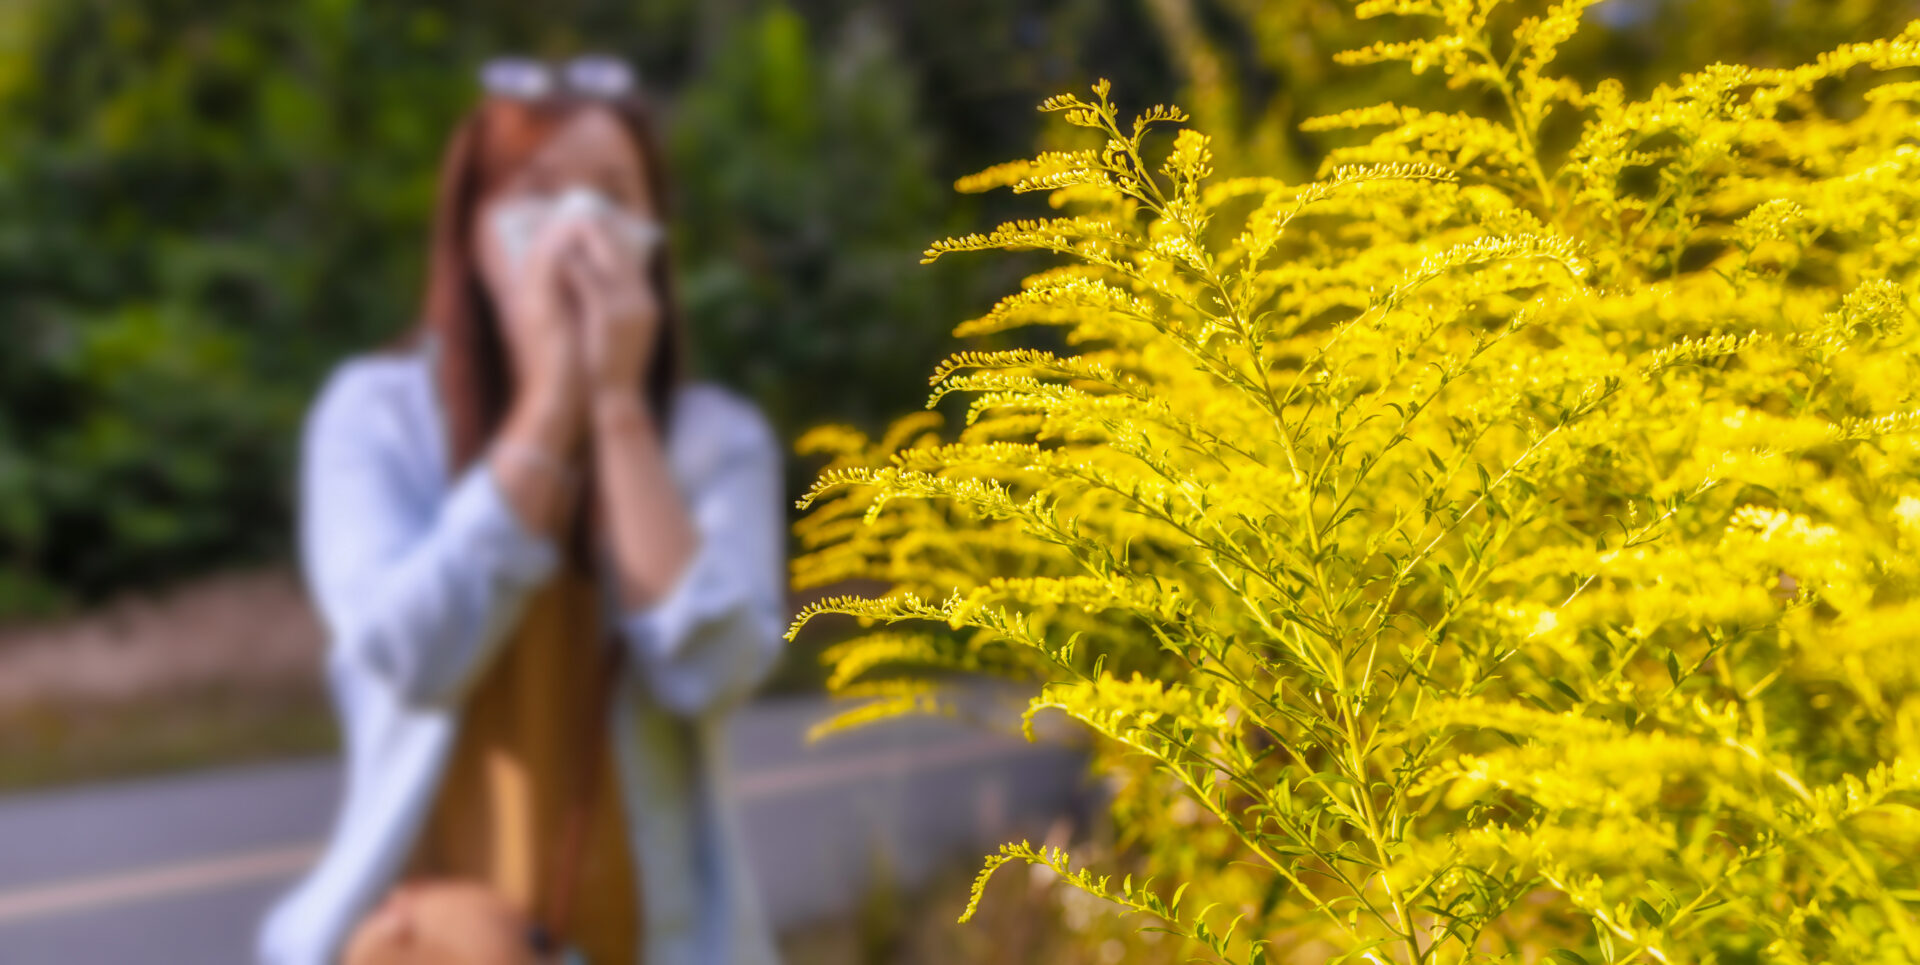 Ambrosia bush in the background woman blows her nose in napkin. Seasonal allergic reaction to plants concept